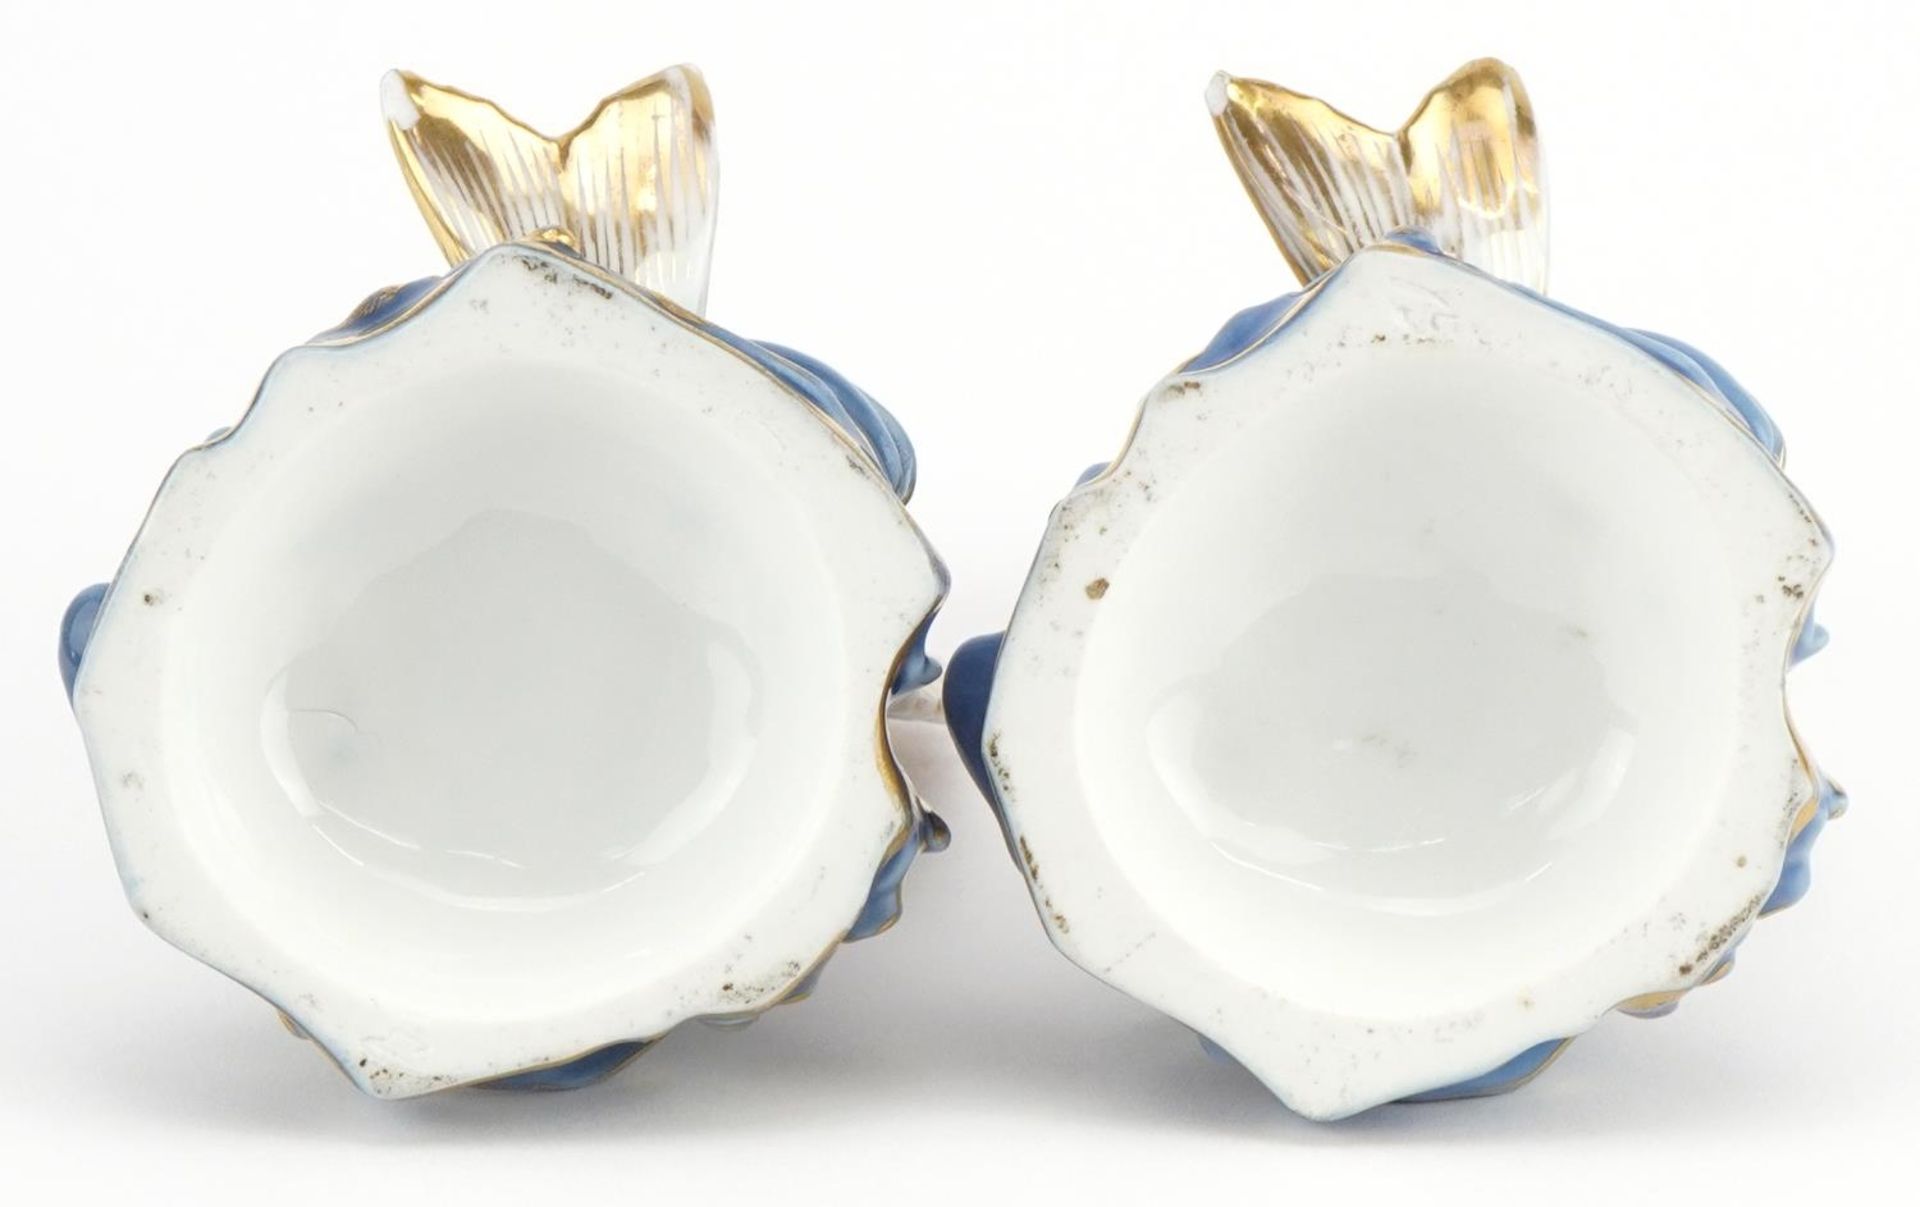 Pair of 19th century continental porcelain scent bottles with stoppers in the form of fish, each - Image 4 of 4